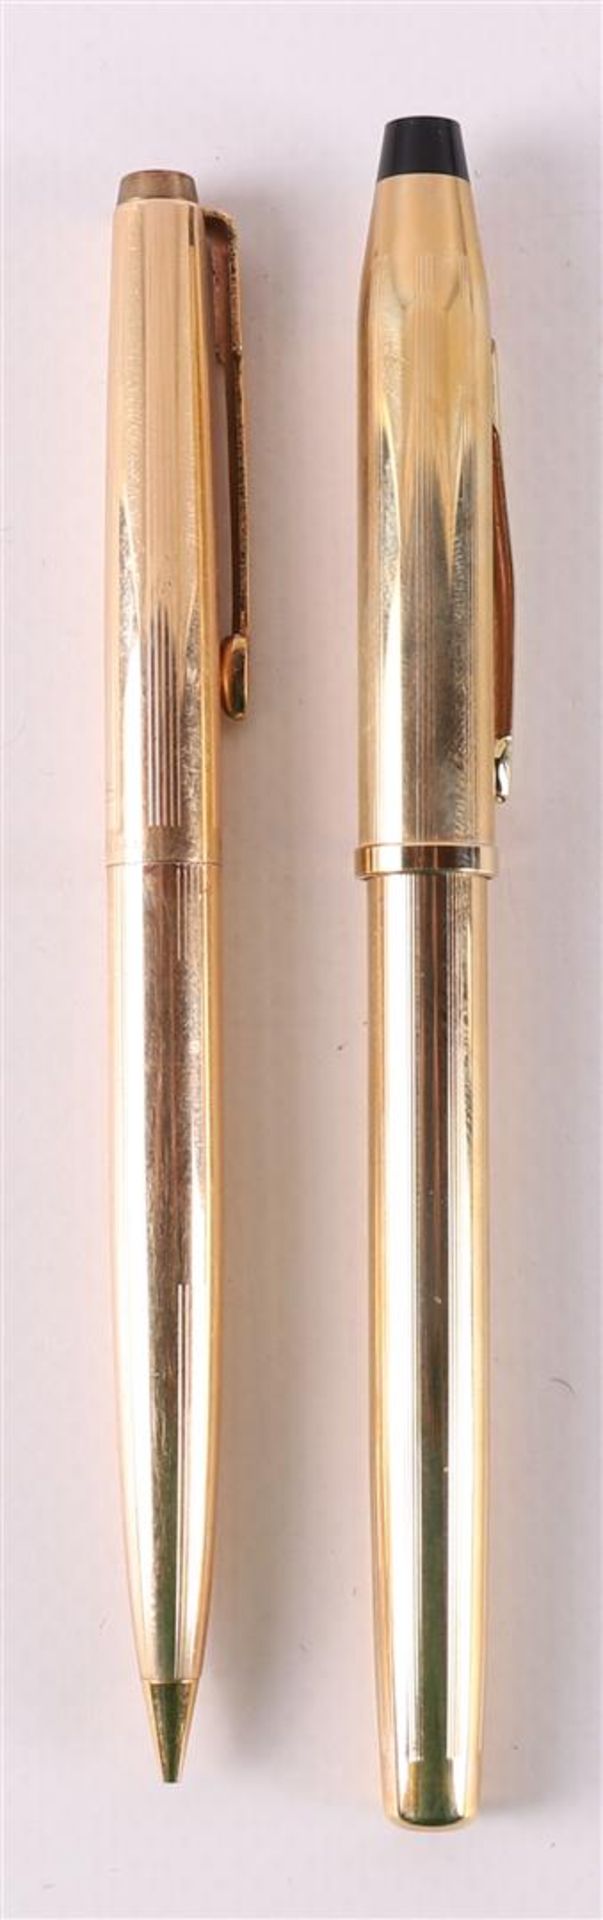 A Cross fountain pen with 10KT Rolled Gold jacket + Parker ballpoint pen